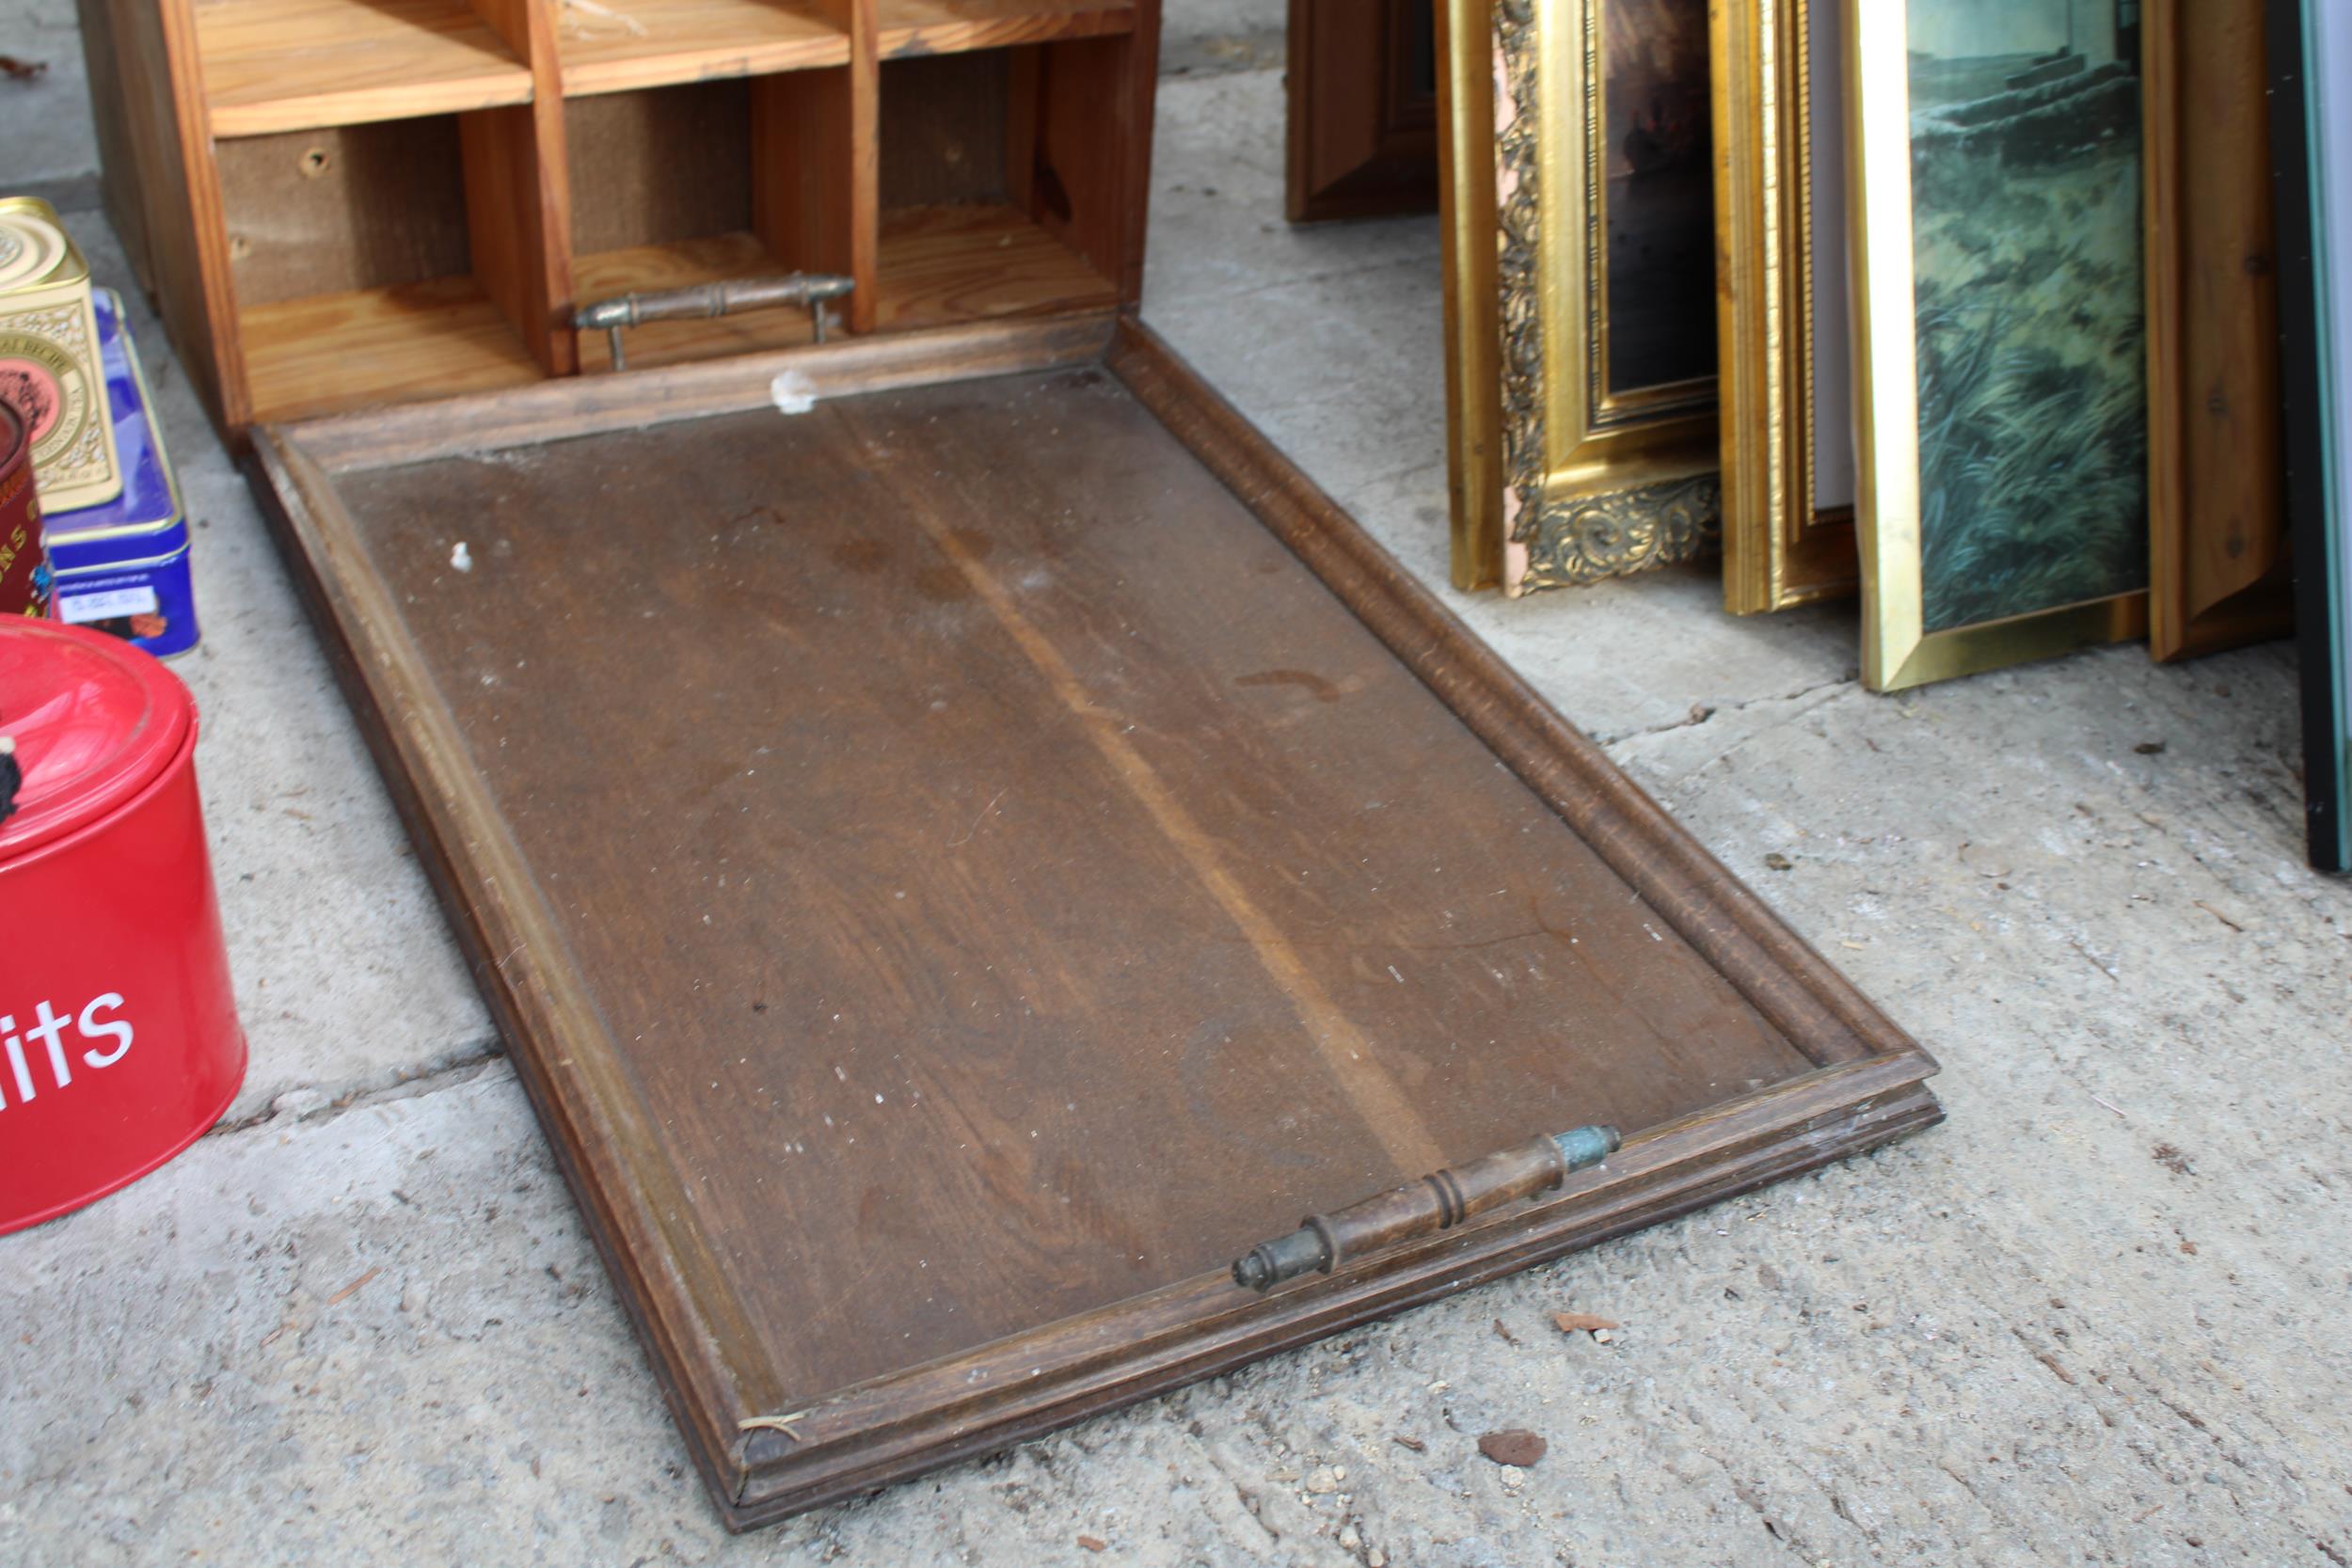 A VINTAGE TWIN HANDLED WOODEN TRAY AND TWO PIGEON HOLE UNITS - Image 2 of 3